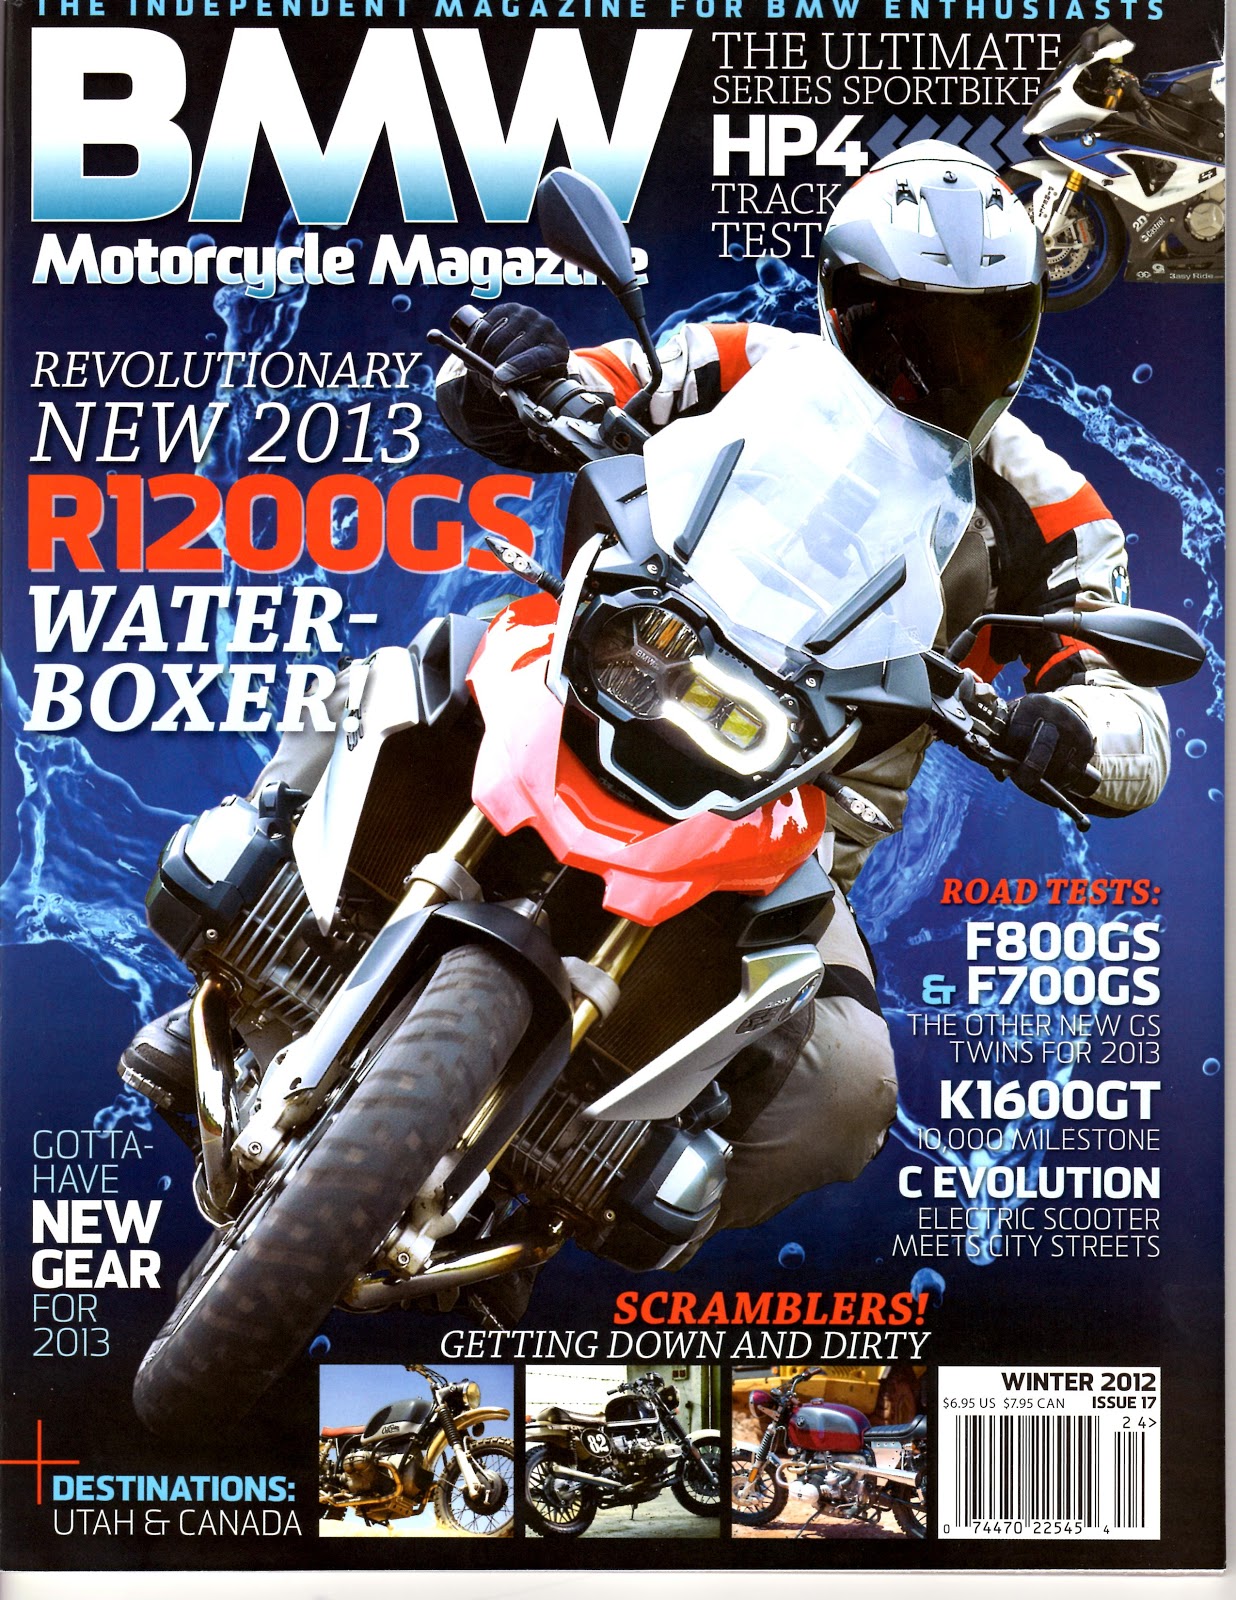 Giant Loop Review: BMW Motorcycle Magazine Tests Giant Loop Dry Pods | Go Light. Go Fast. Go Far